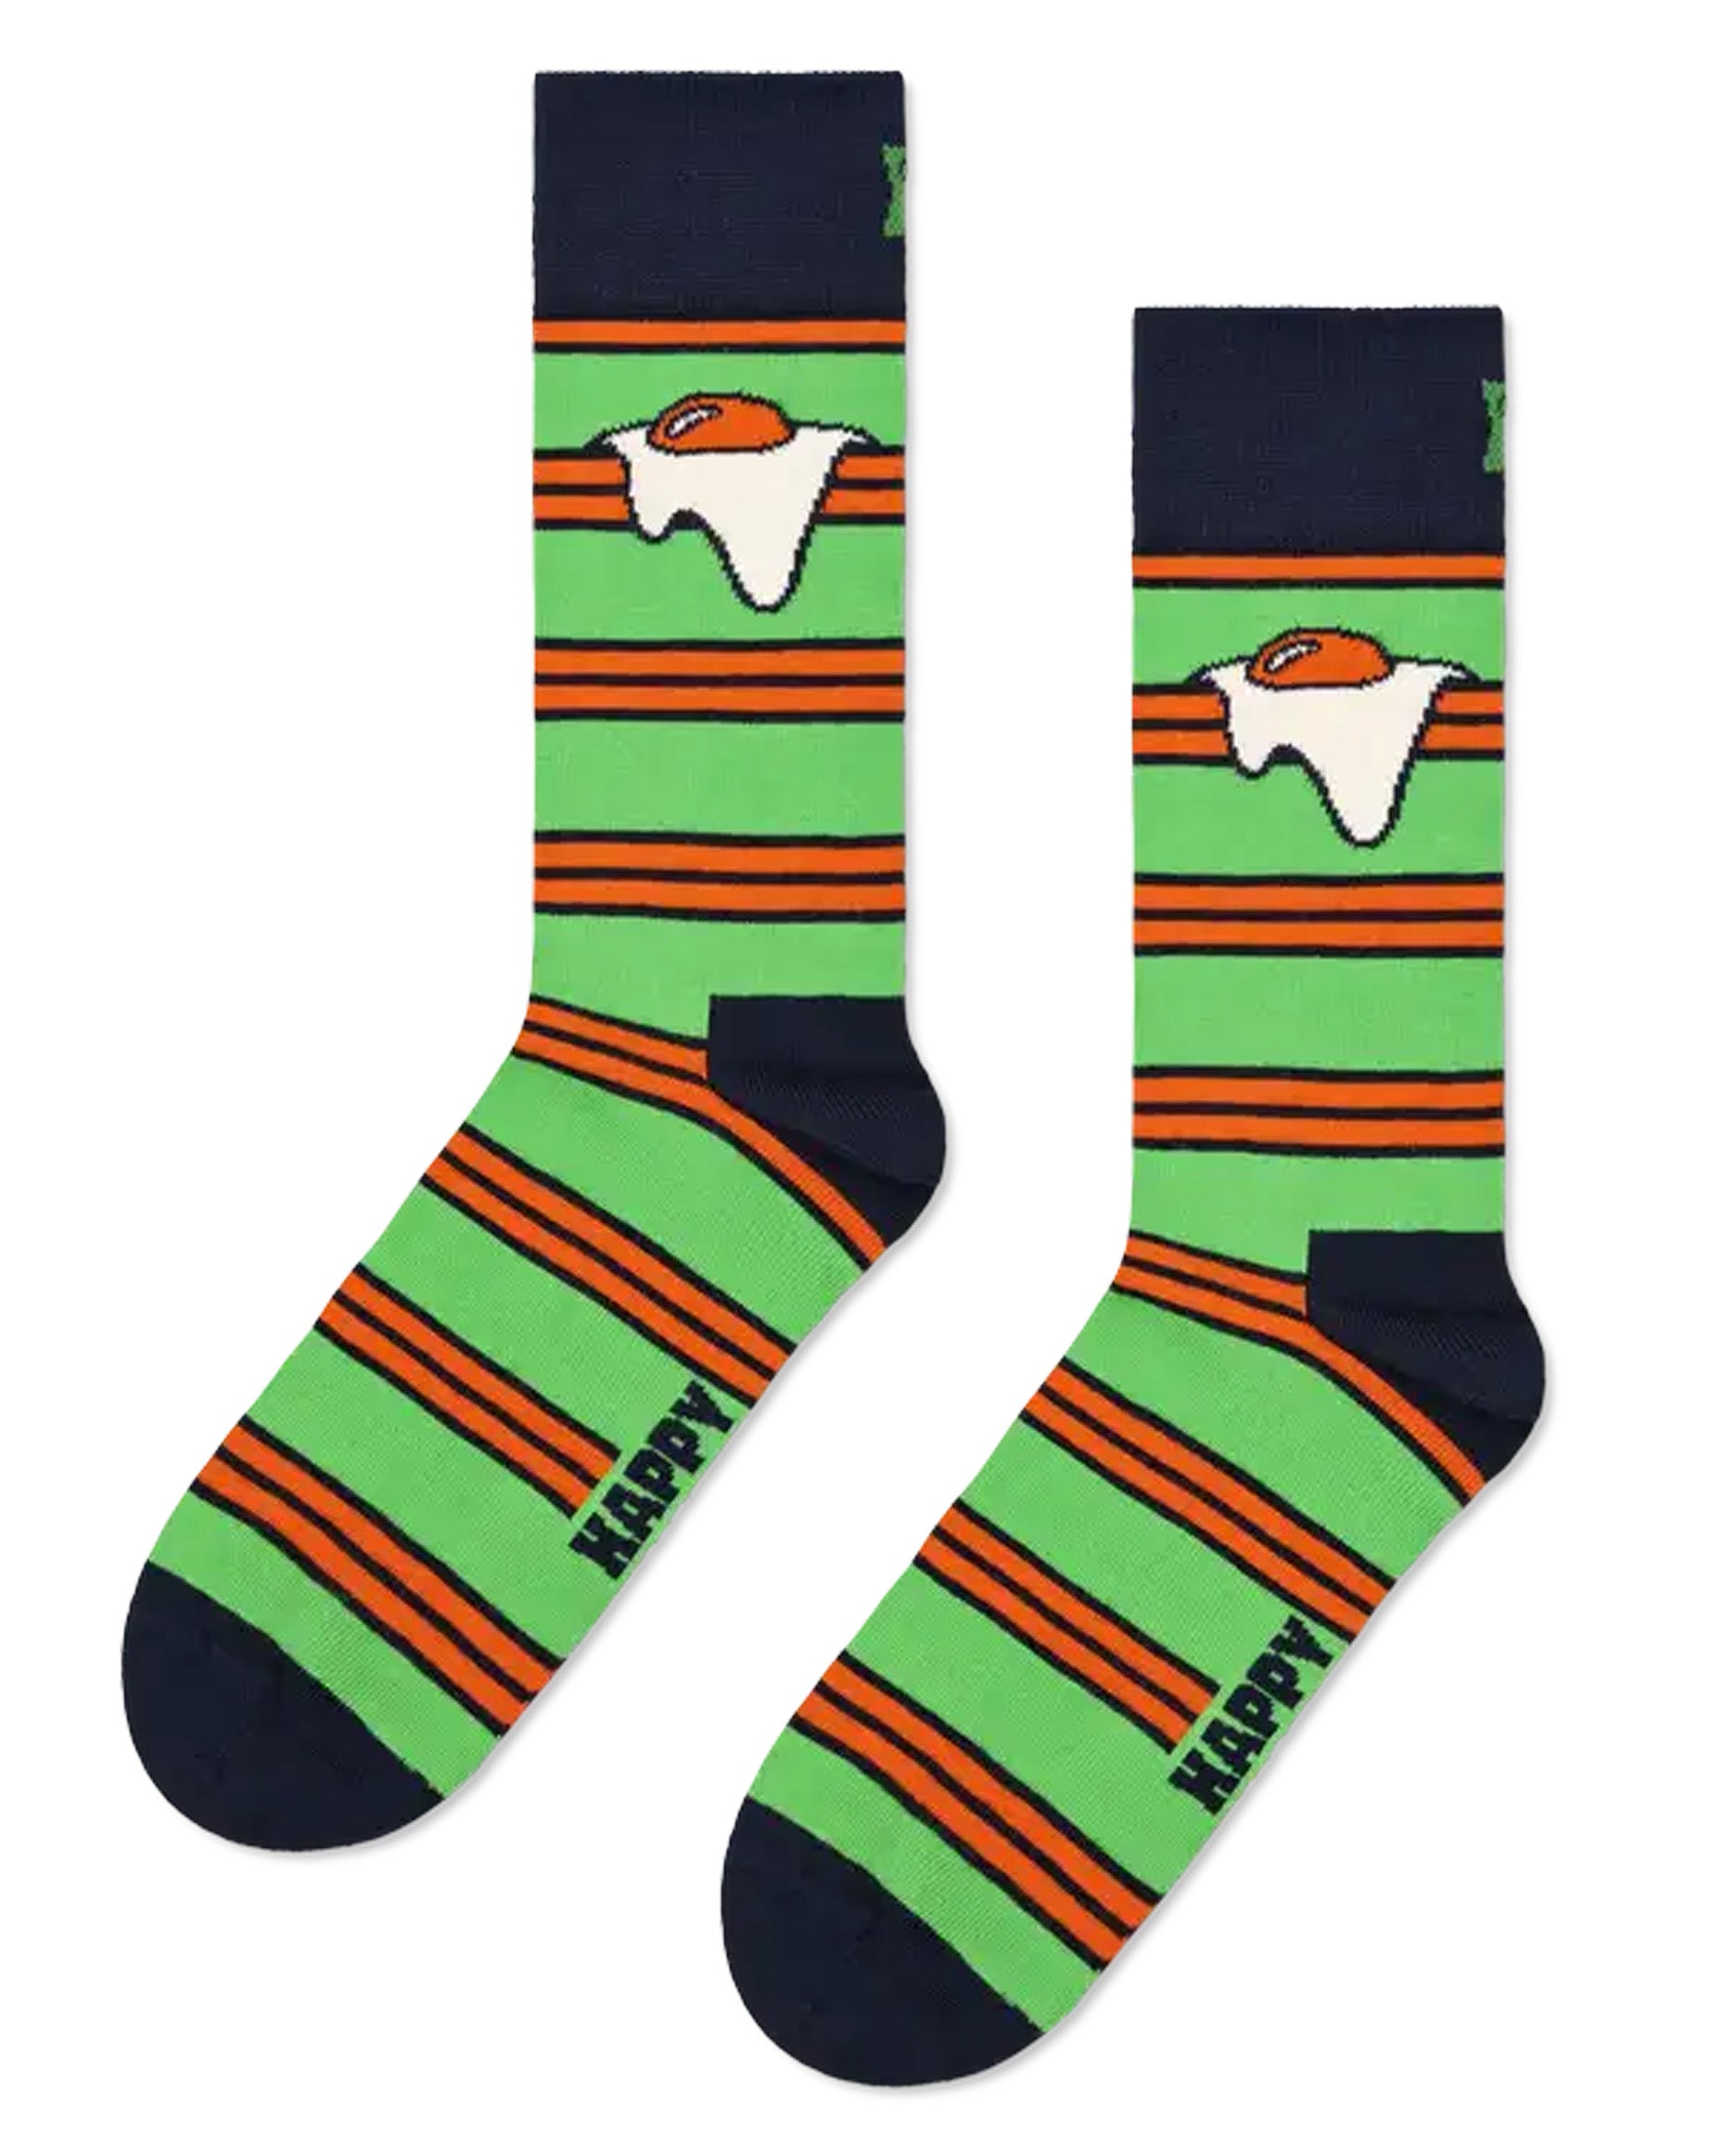 Happy Sock P000758 Egg On Stripe Sock - Bright green cotton crew length ankle socks with an orange and navy horizontal stripe pattern, fried egg, navy toe, heel and cuff.